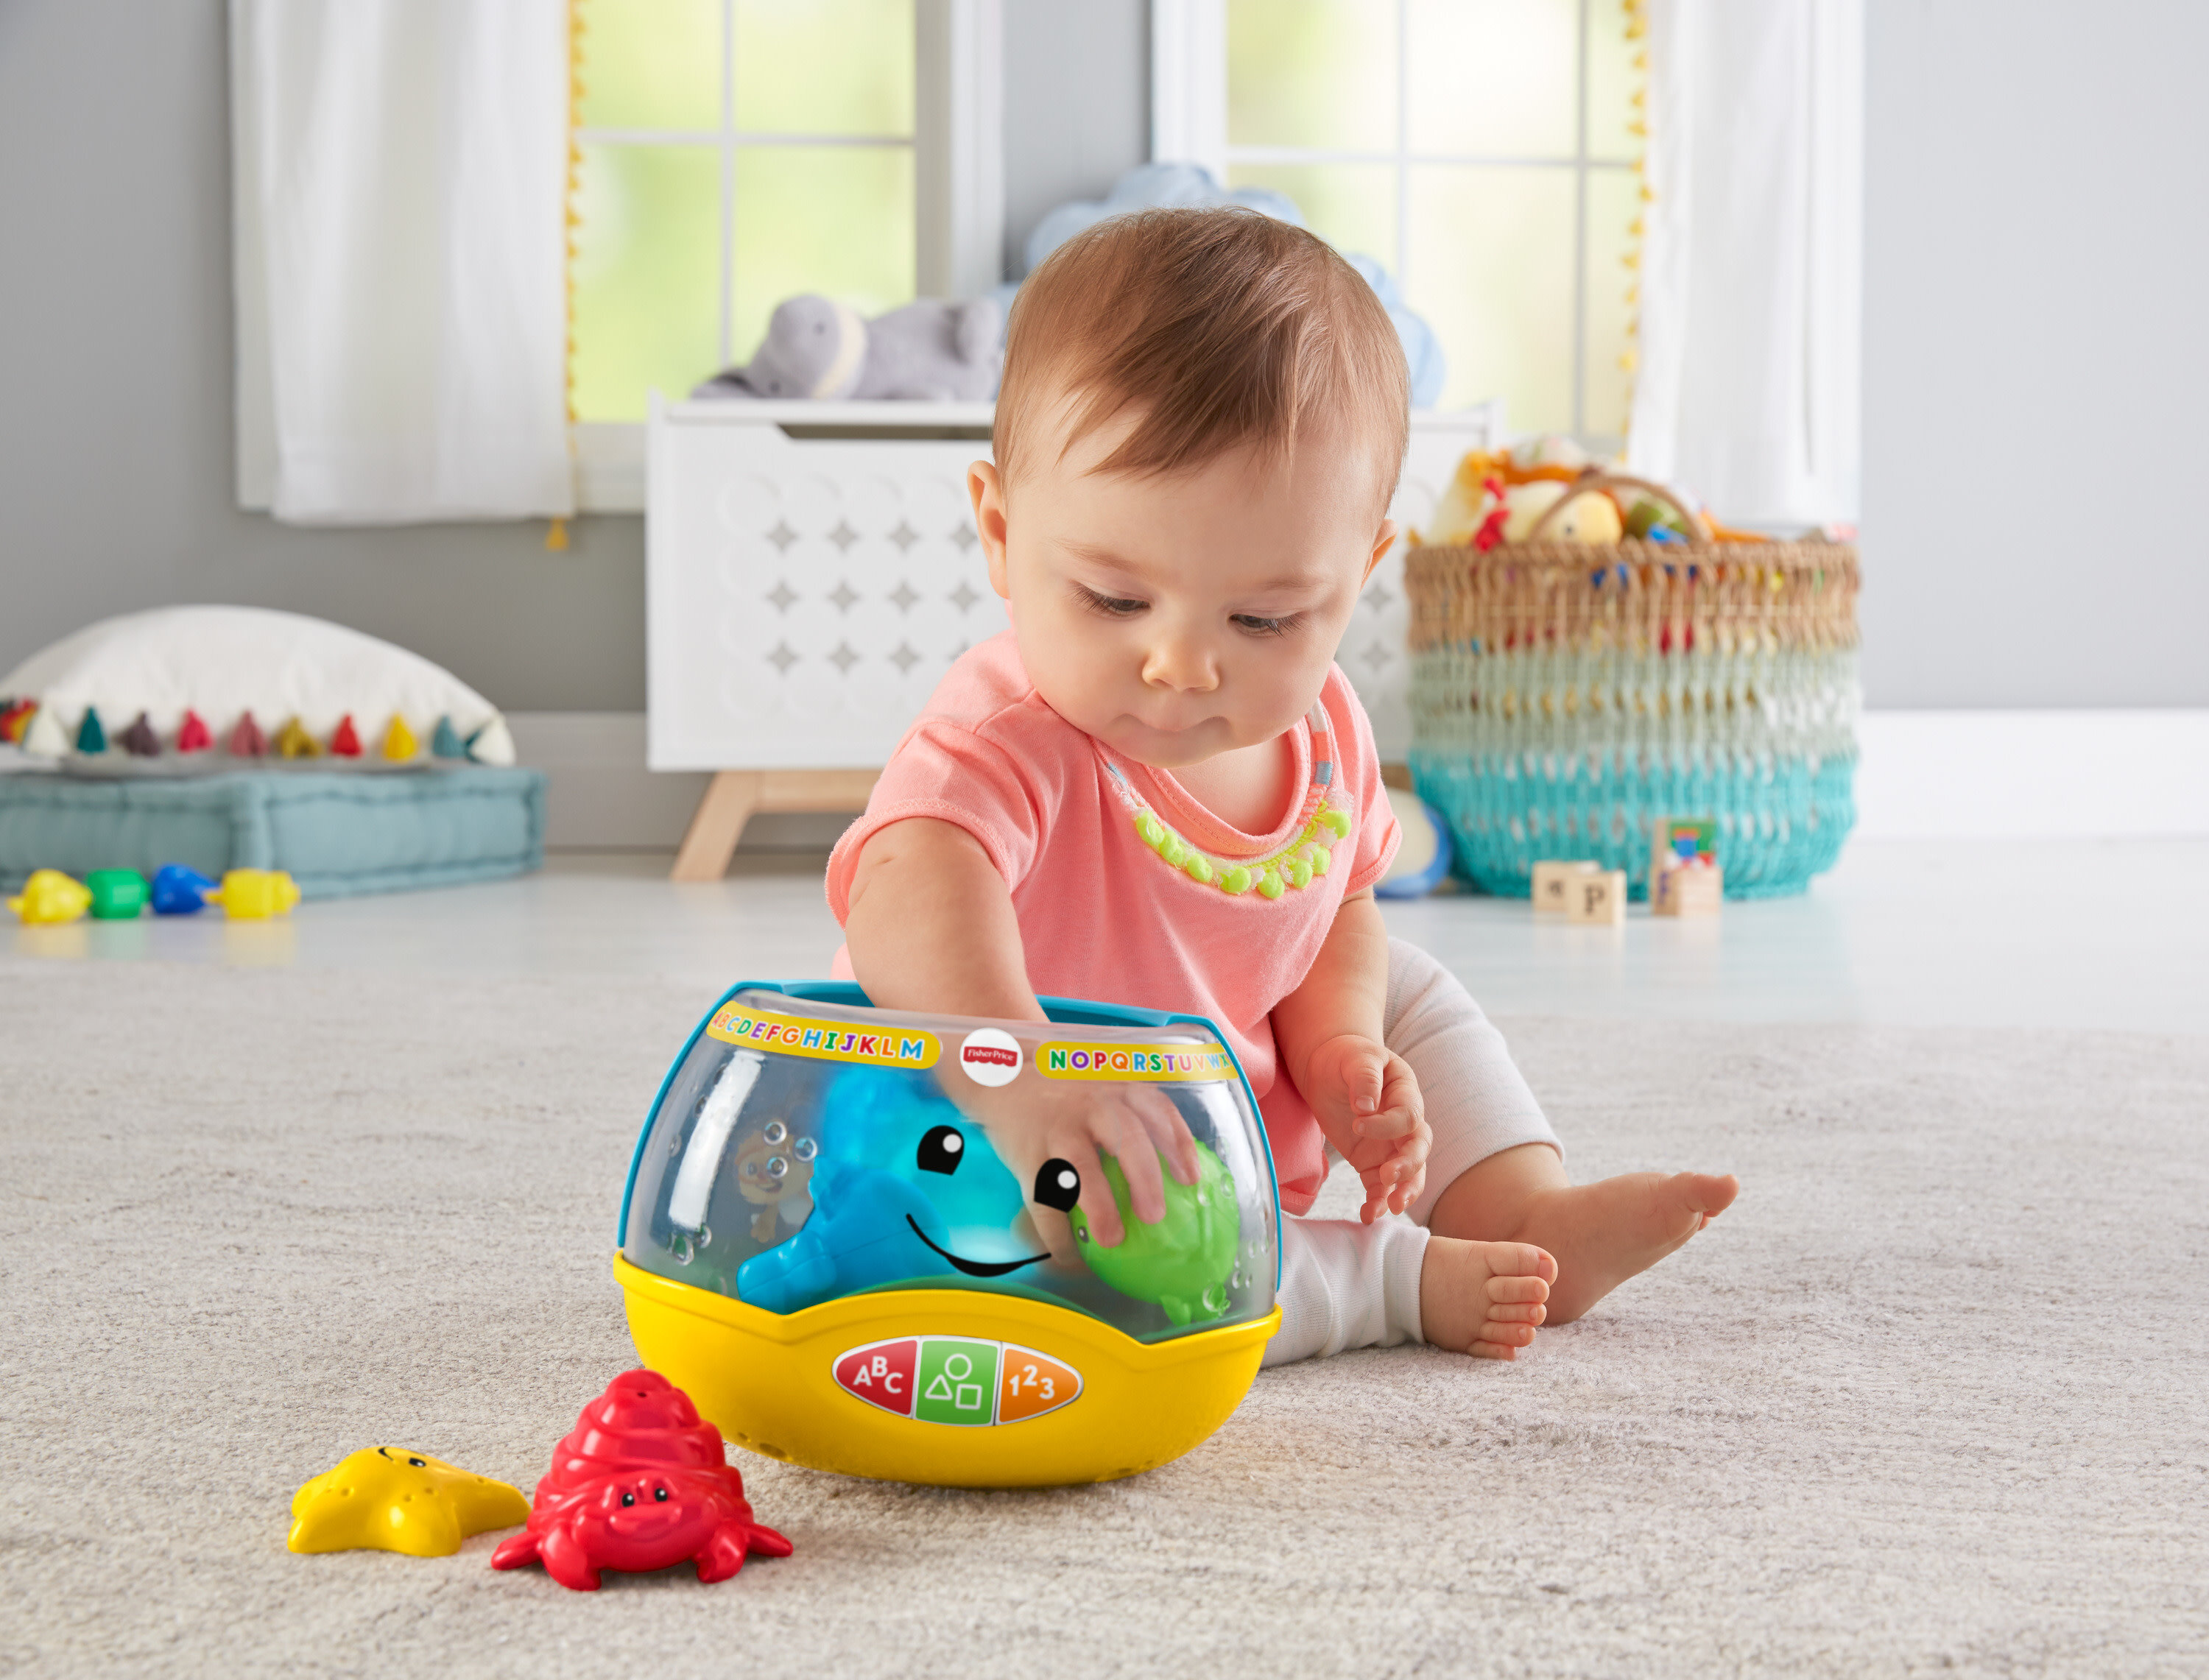 Fisher-Price Laugh & Learn Magical Lights Fishbowl Baby & Toddler Musical Learning Toy - image 3 of 7